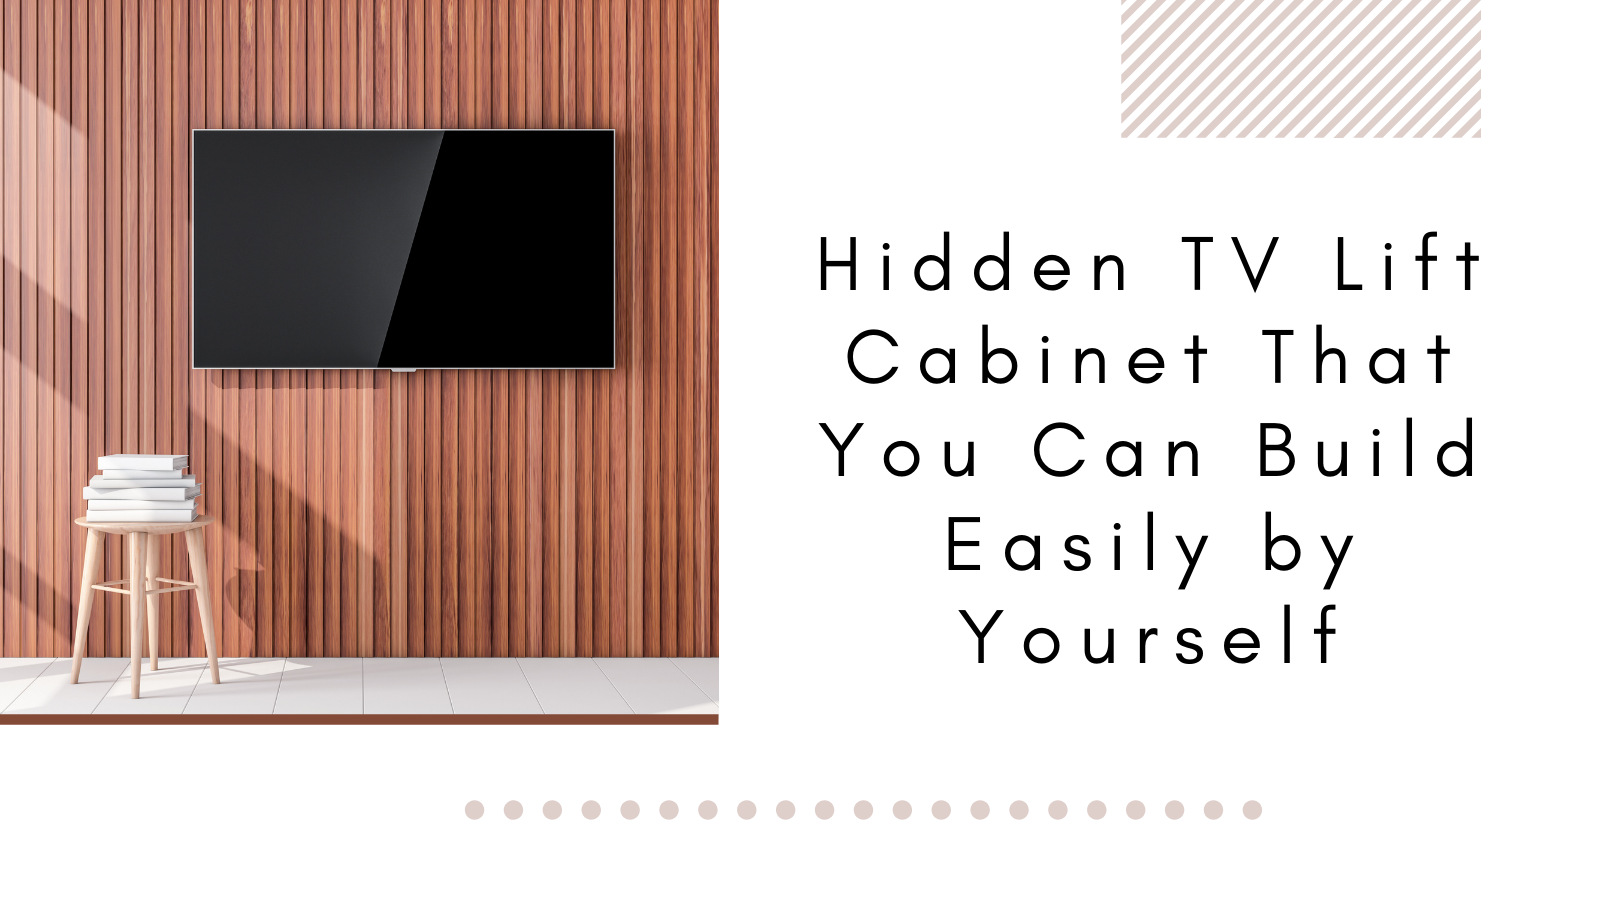 Hidden TV Lift Cabinet That You Can Build Easily by Yourself